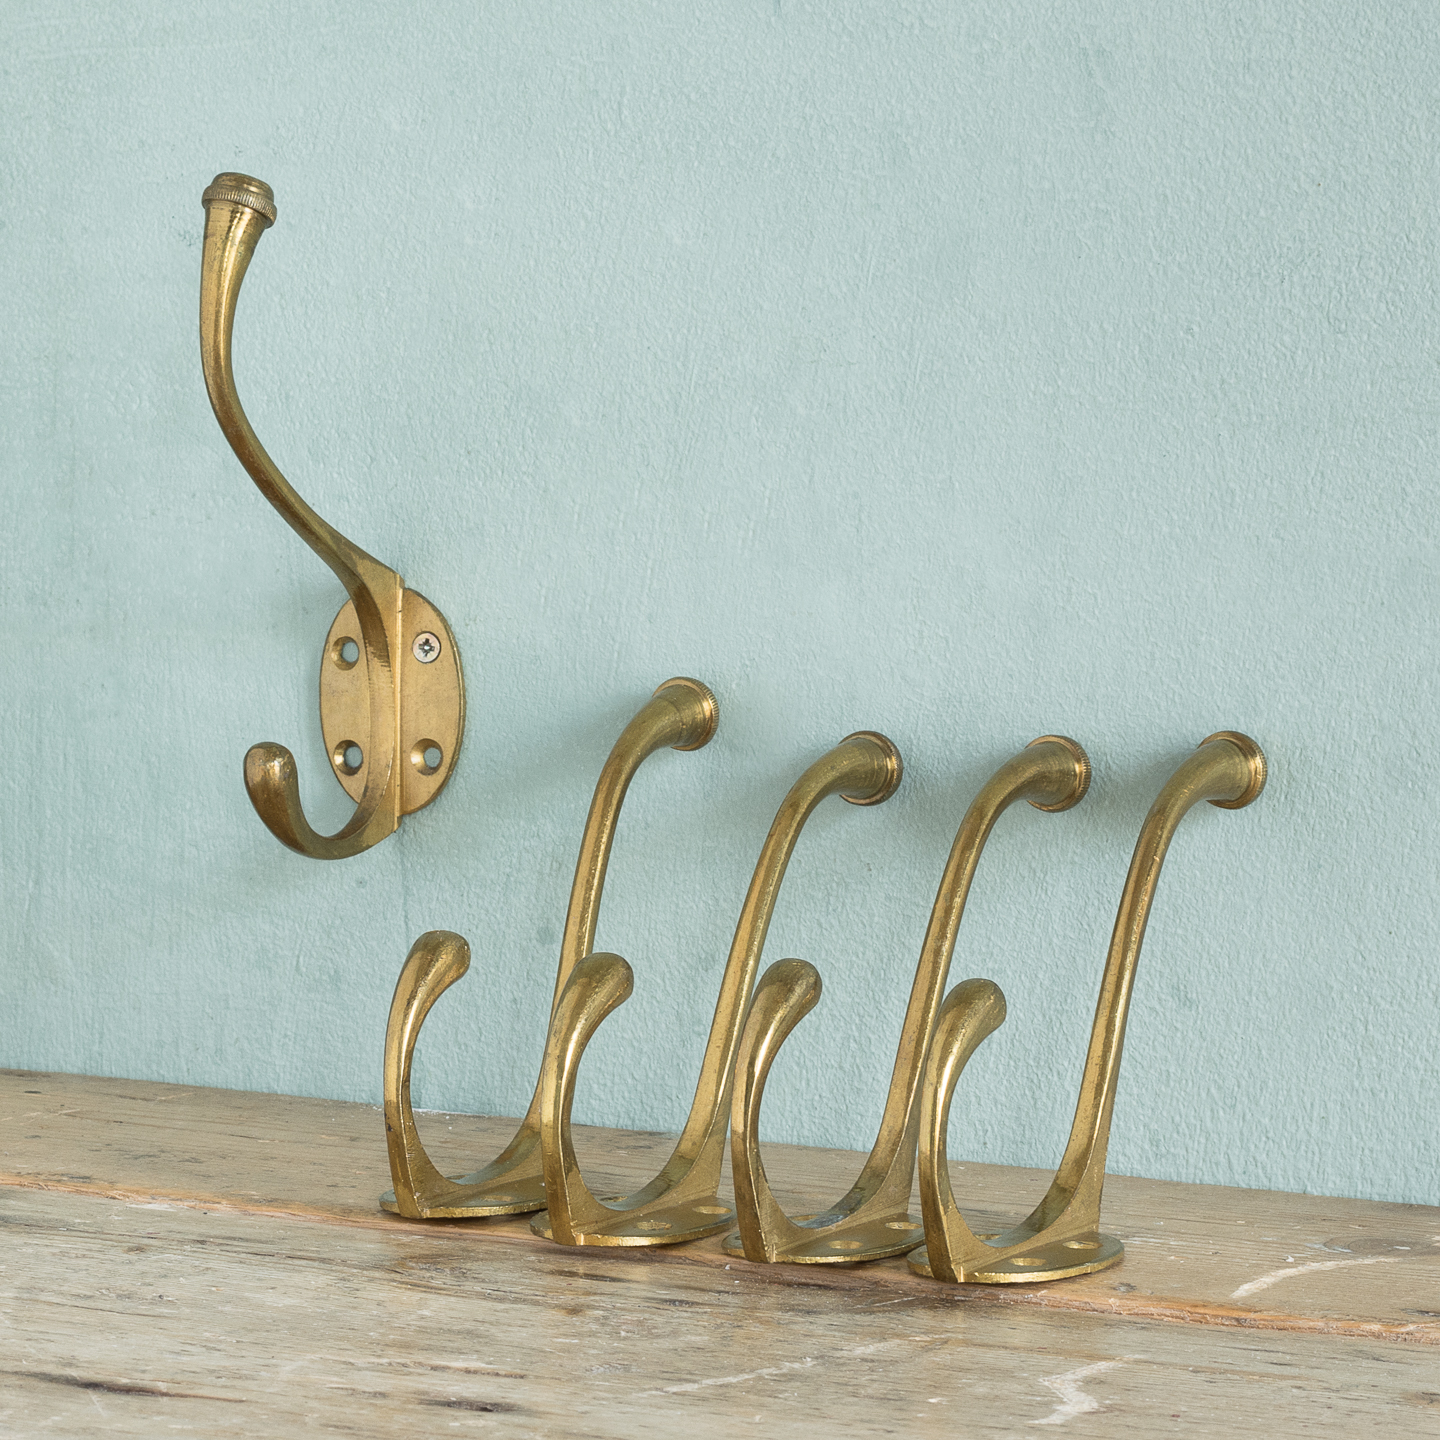 Lacquered brass coat hooks - LASSCO - England's prime resource for